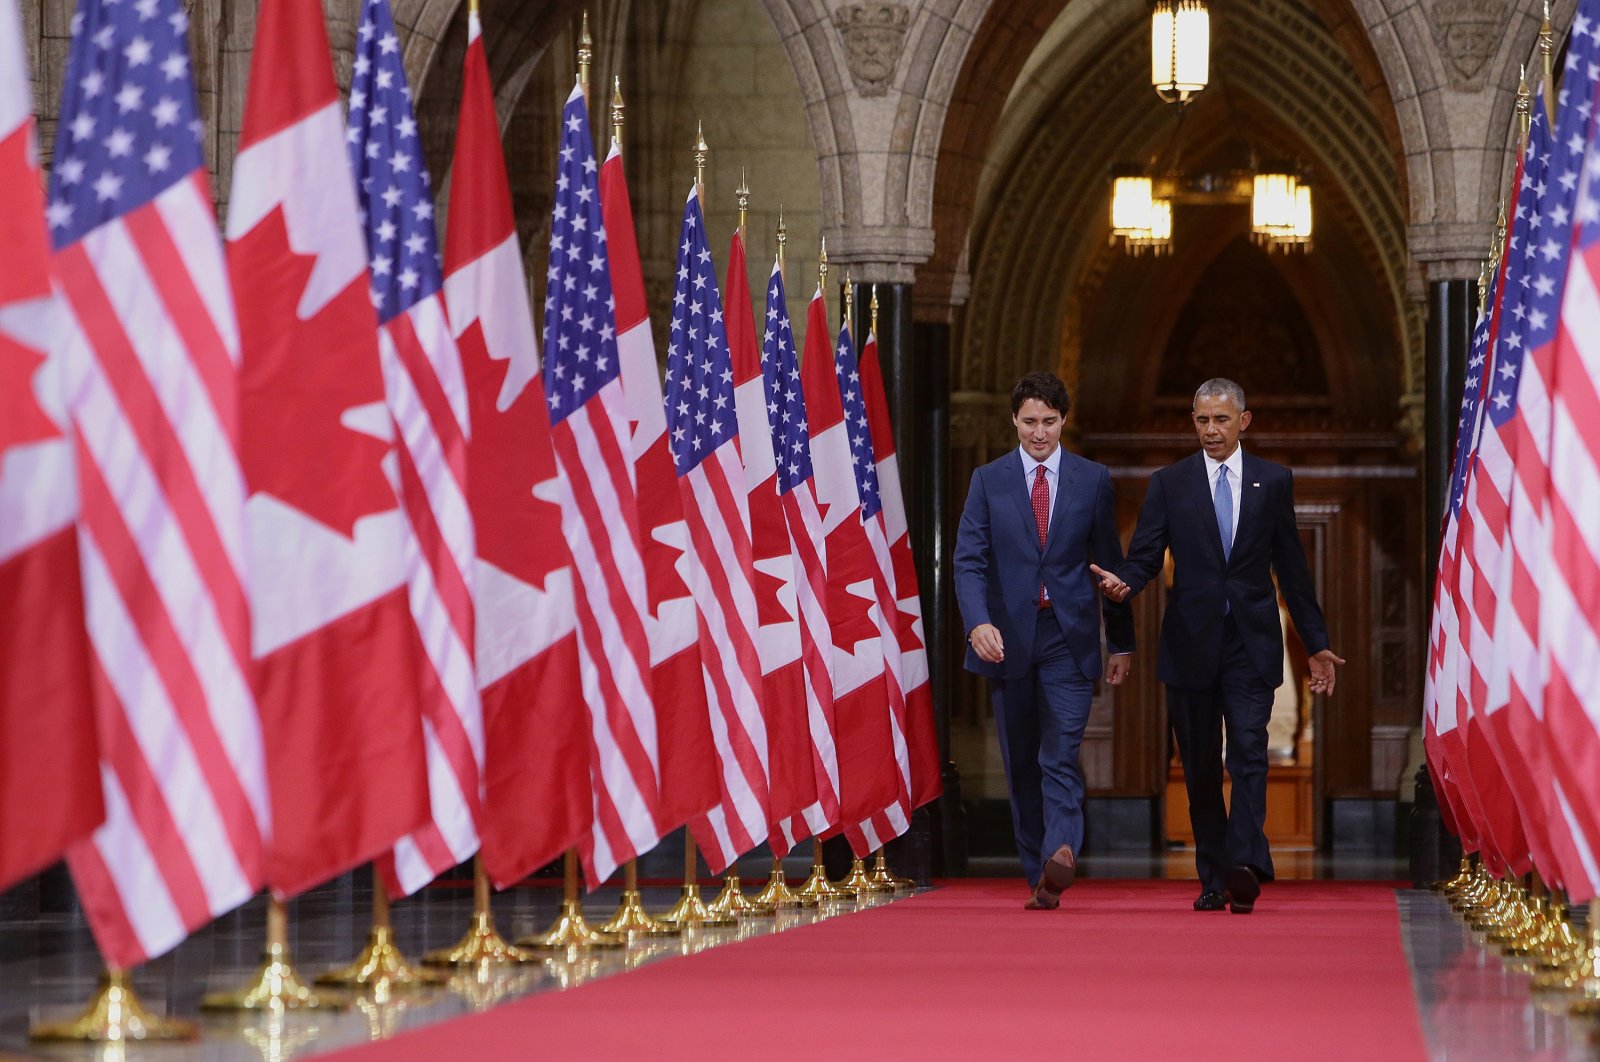 Justin Trudeau, Canada's prime minister (L) and then U.S. President Barack Obama, speak as they walk inside the Hall of Honour inside Parliament Hill in Ottawa, Ontario, Canada, June 29, 2016 (Bloomberg via Getty Images)